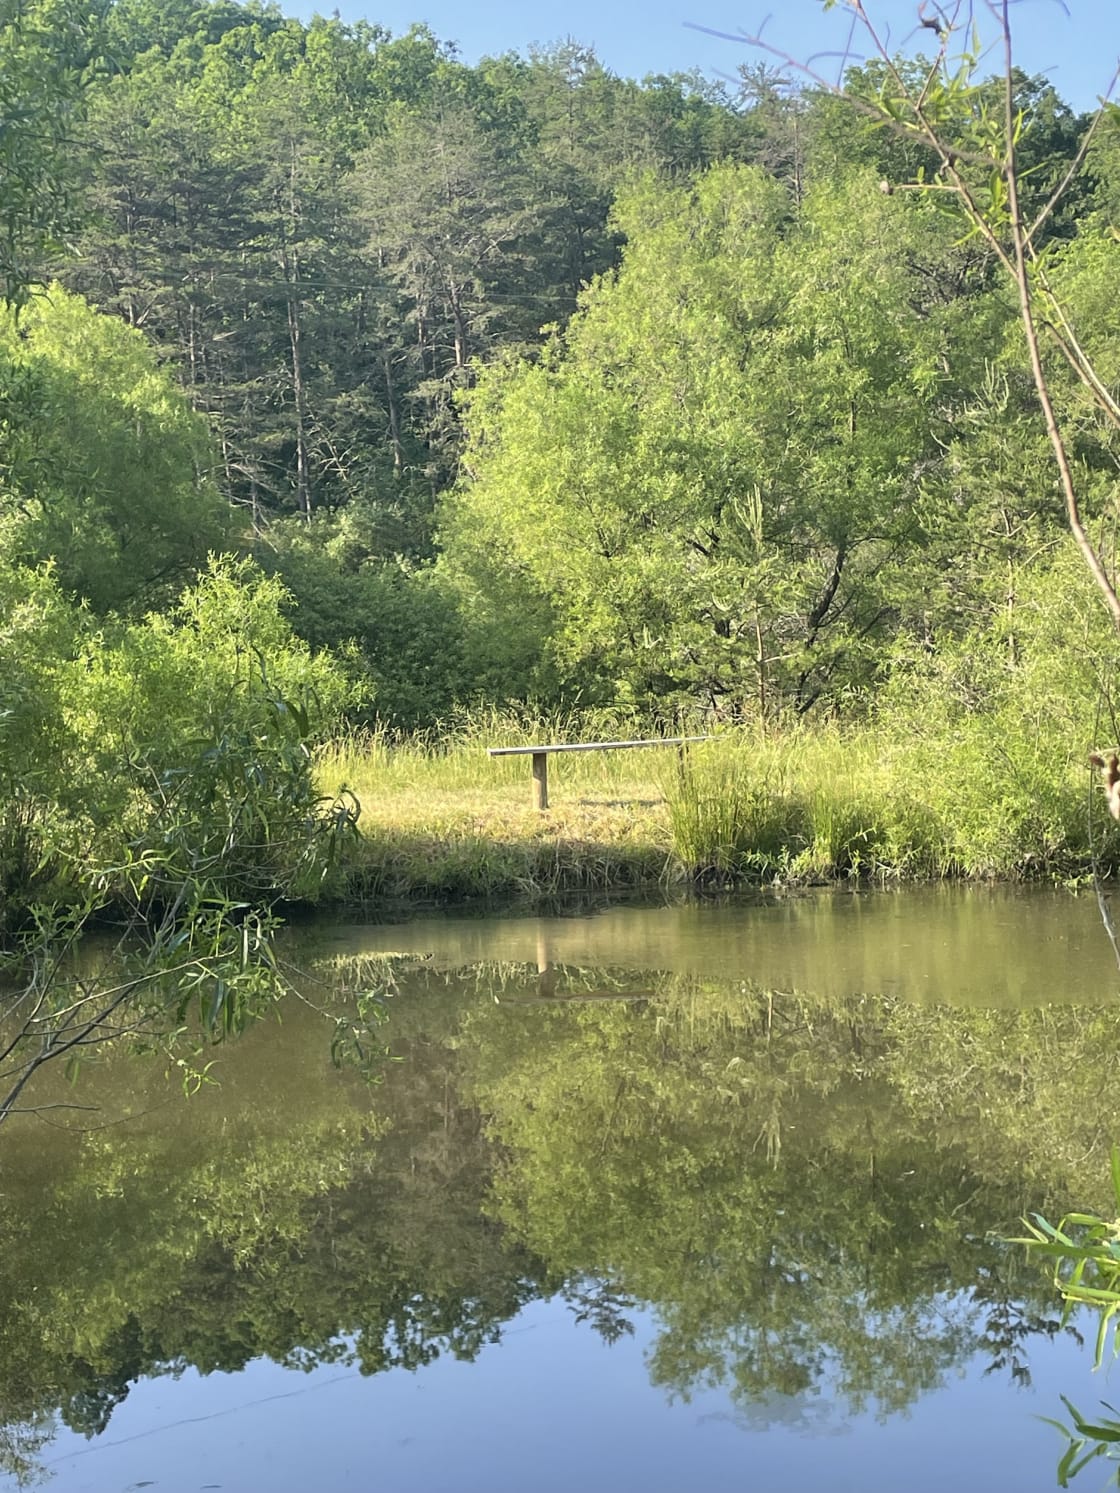 Pond stocked with bass and blue gill